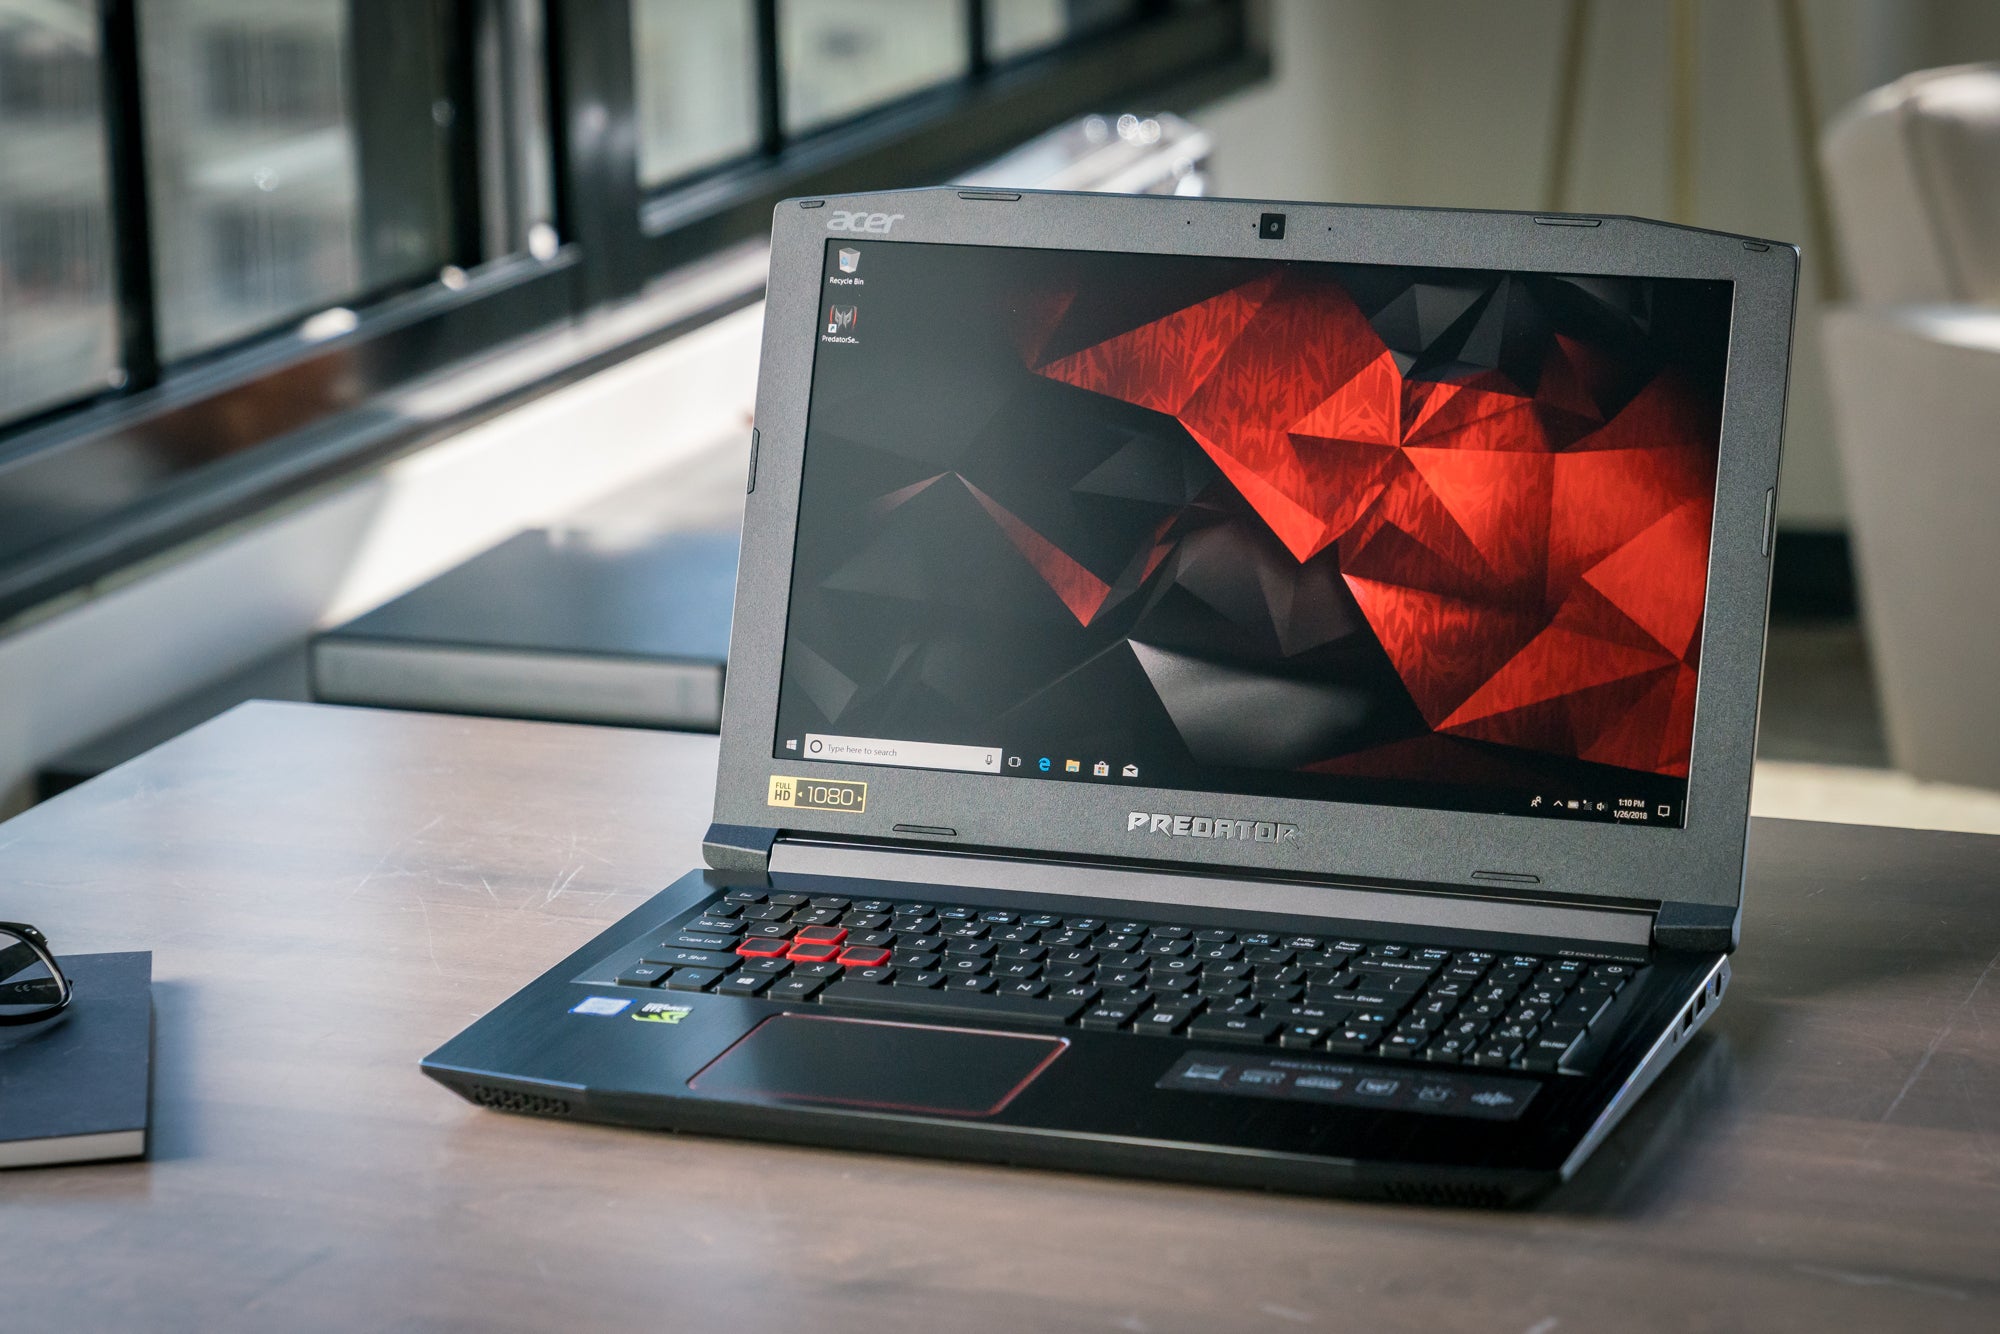 Acer predator helios 300 gaming laptop g3 571 77qk review Acer Predator Helios 300 Review A Well Rounded Gaming Laptop At A Great Price Pcworld